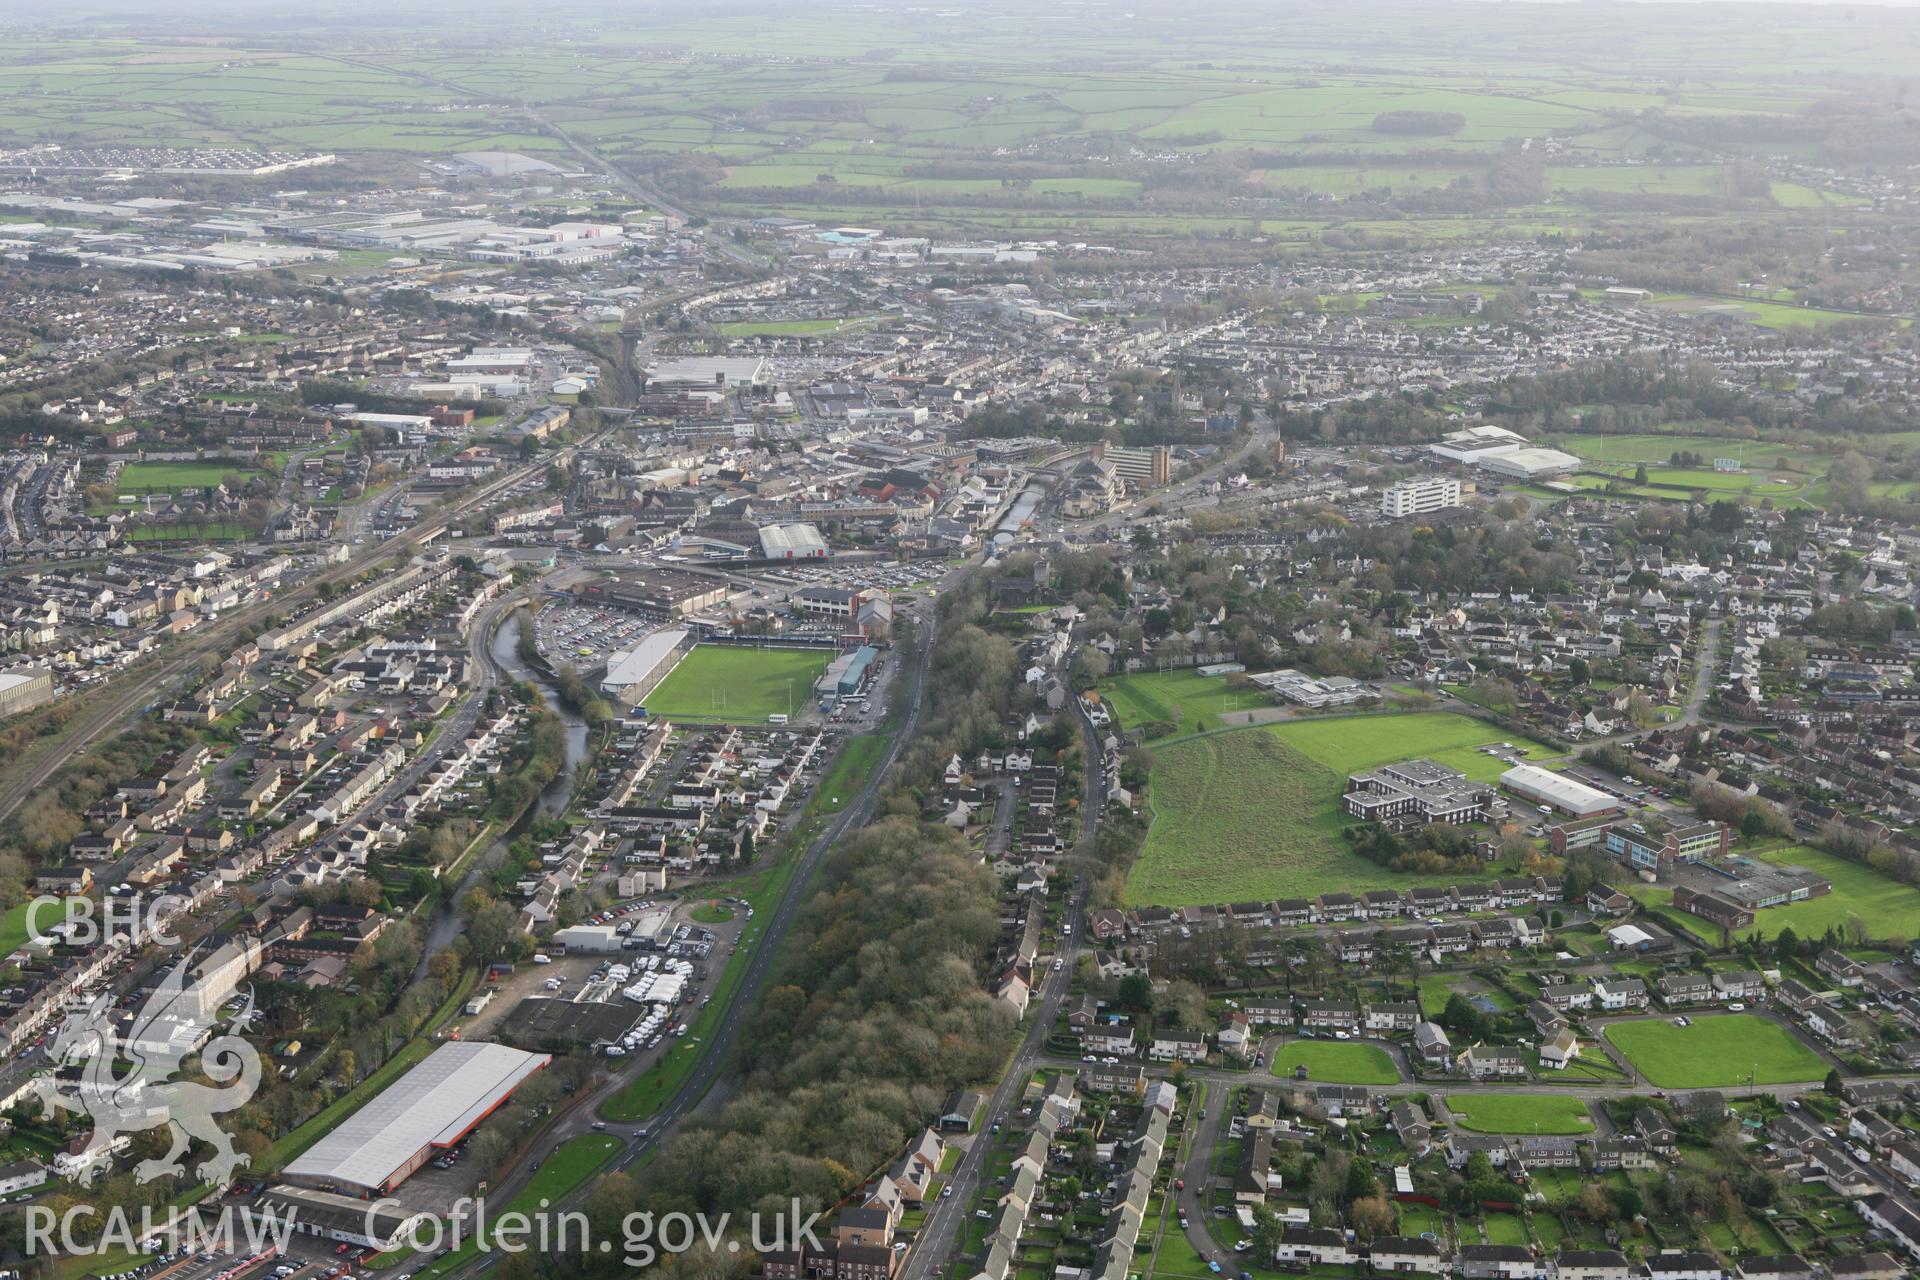 RCAHMW colour oblique photograph of Bridgend, from the north. Taken by Toby Driver on 17/11/2011.